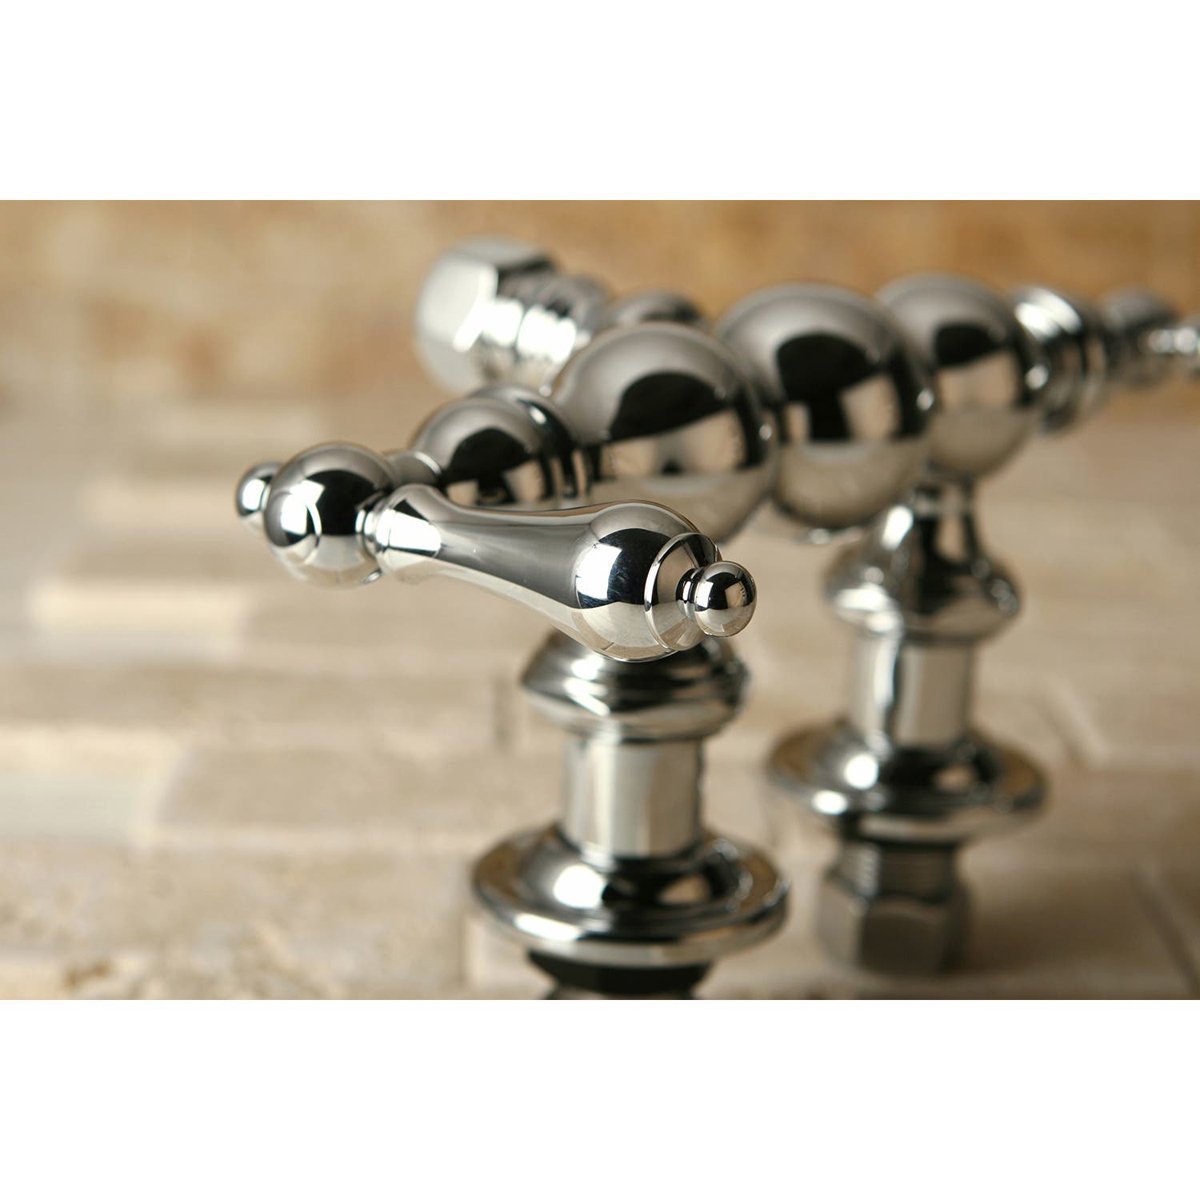 Kingston Brass Vintage Tub Faucet Body Only